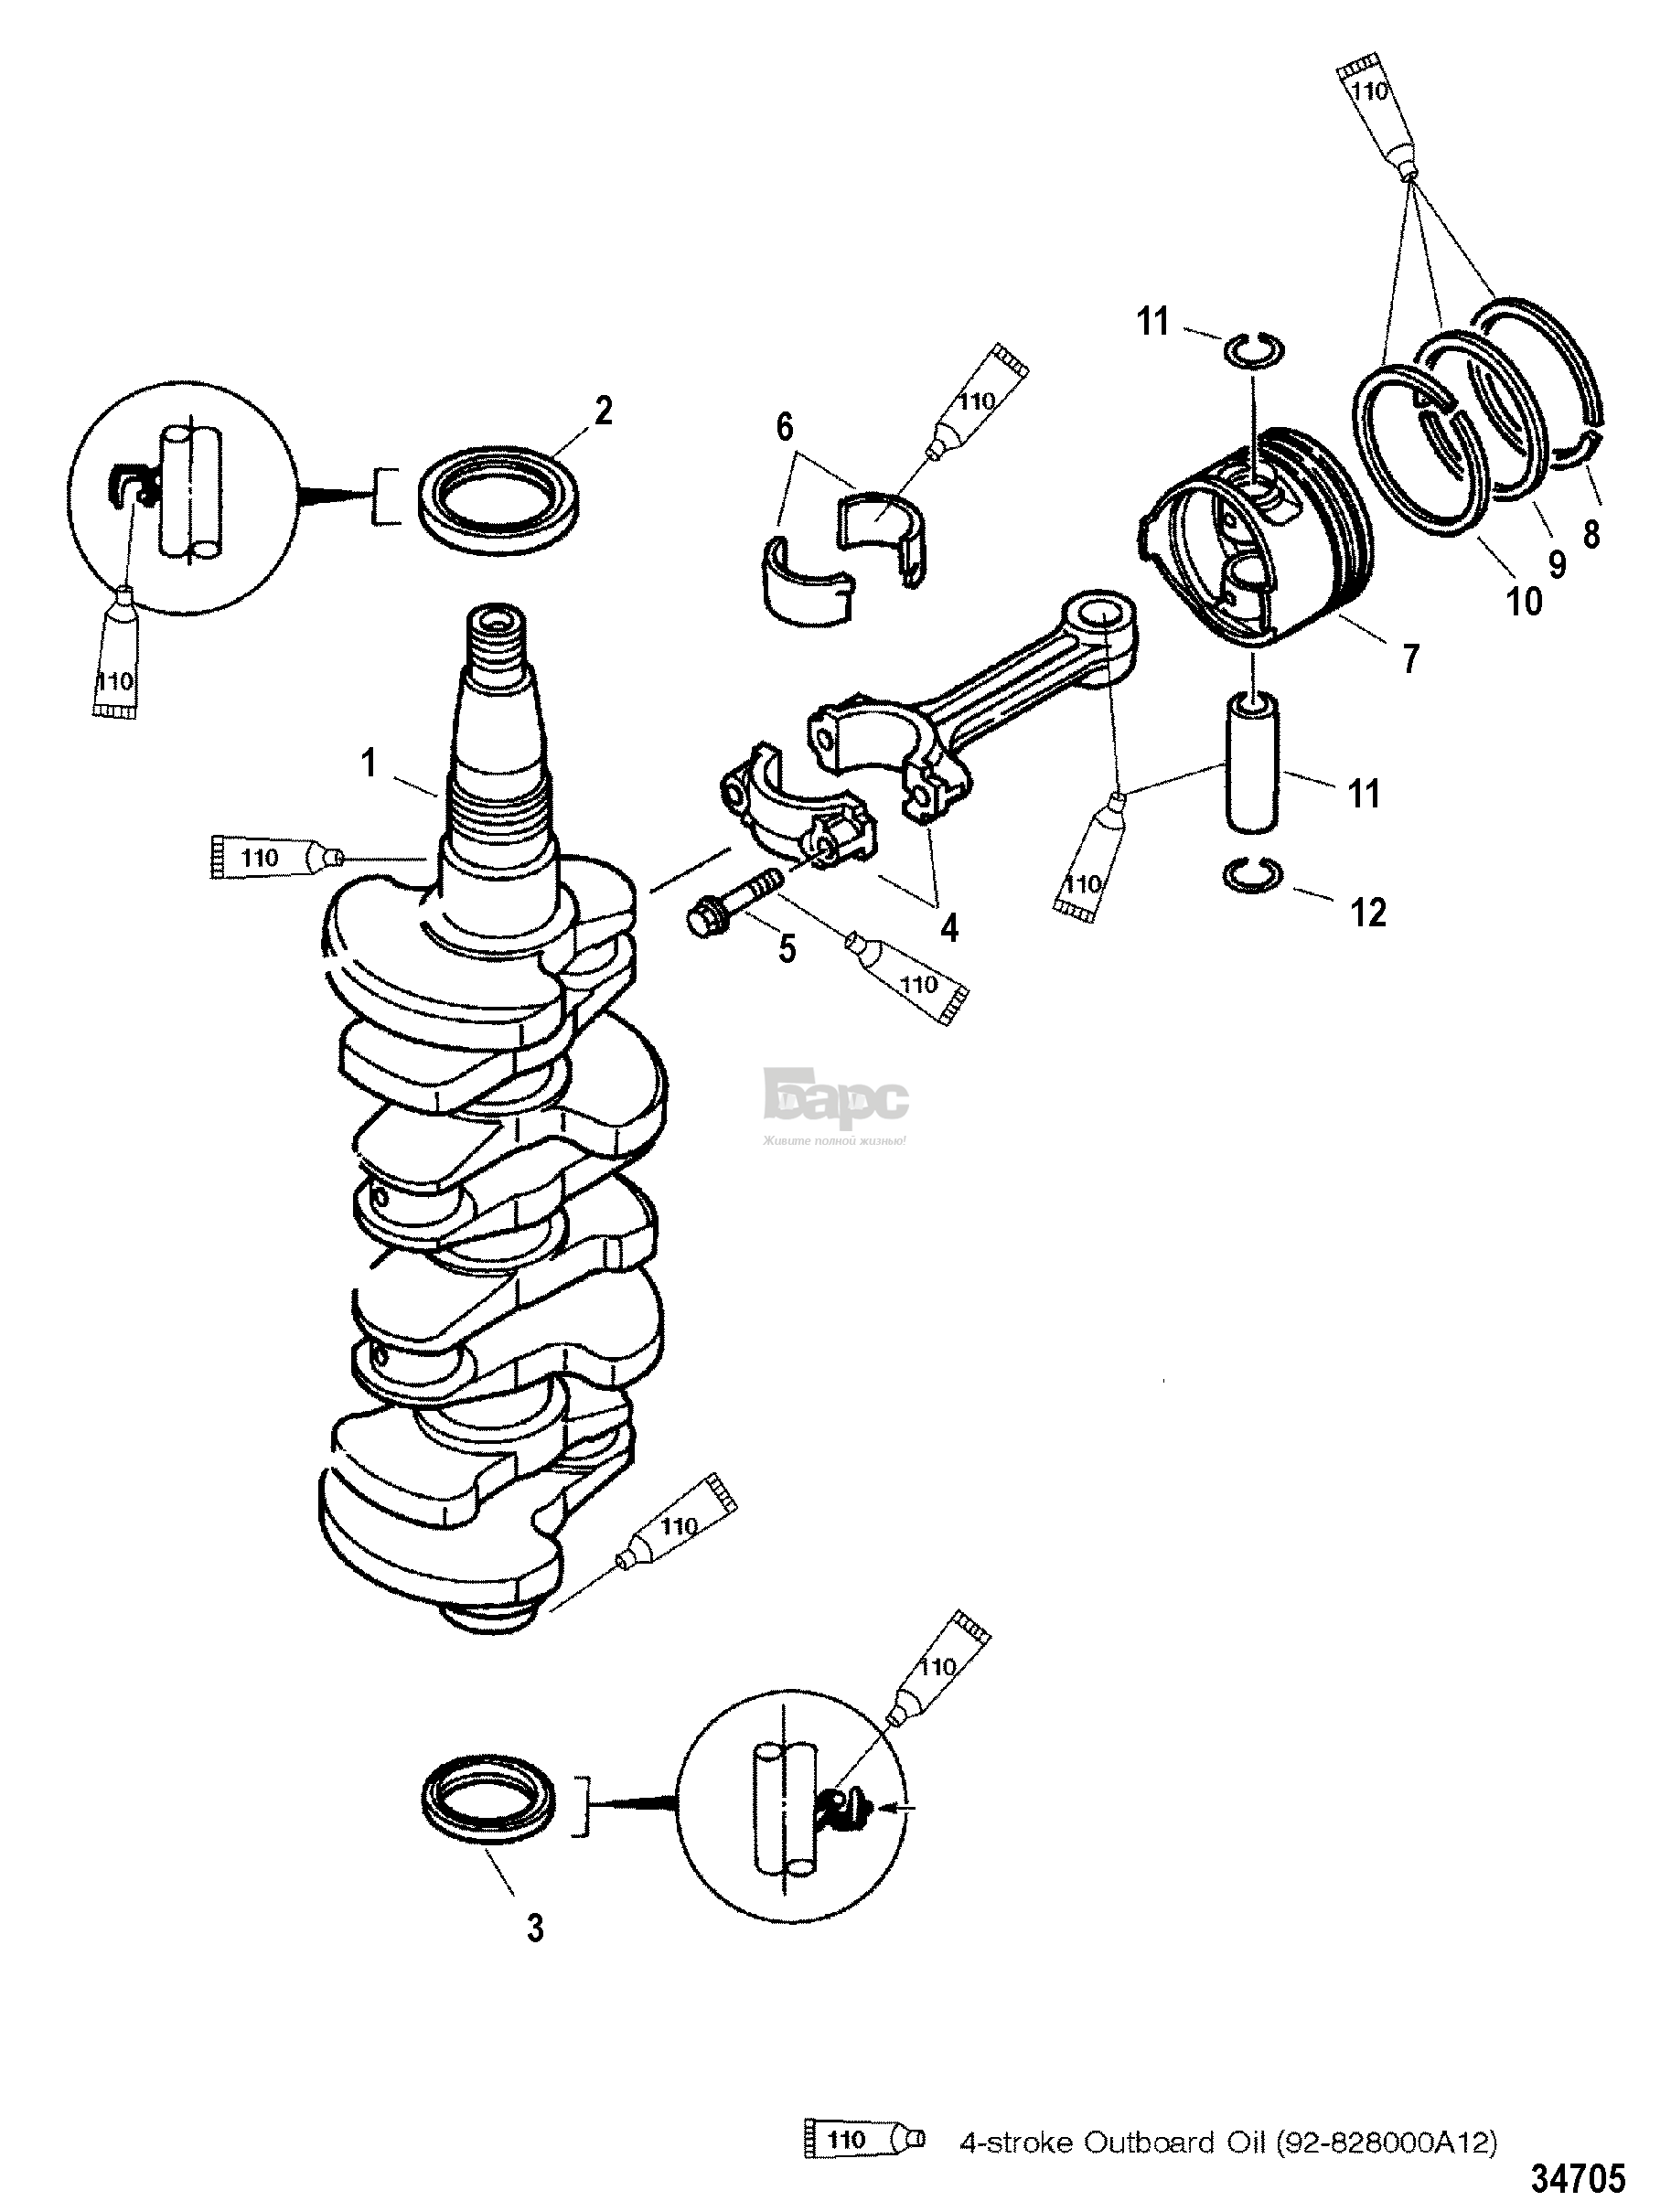 Crankshaft/Pistons and Connecting Rods